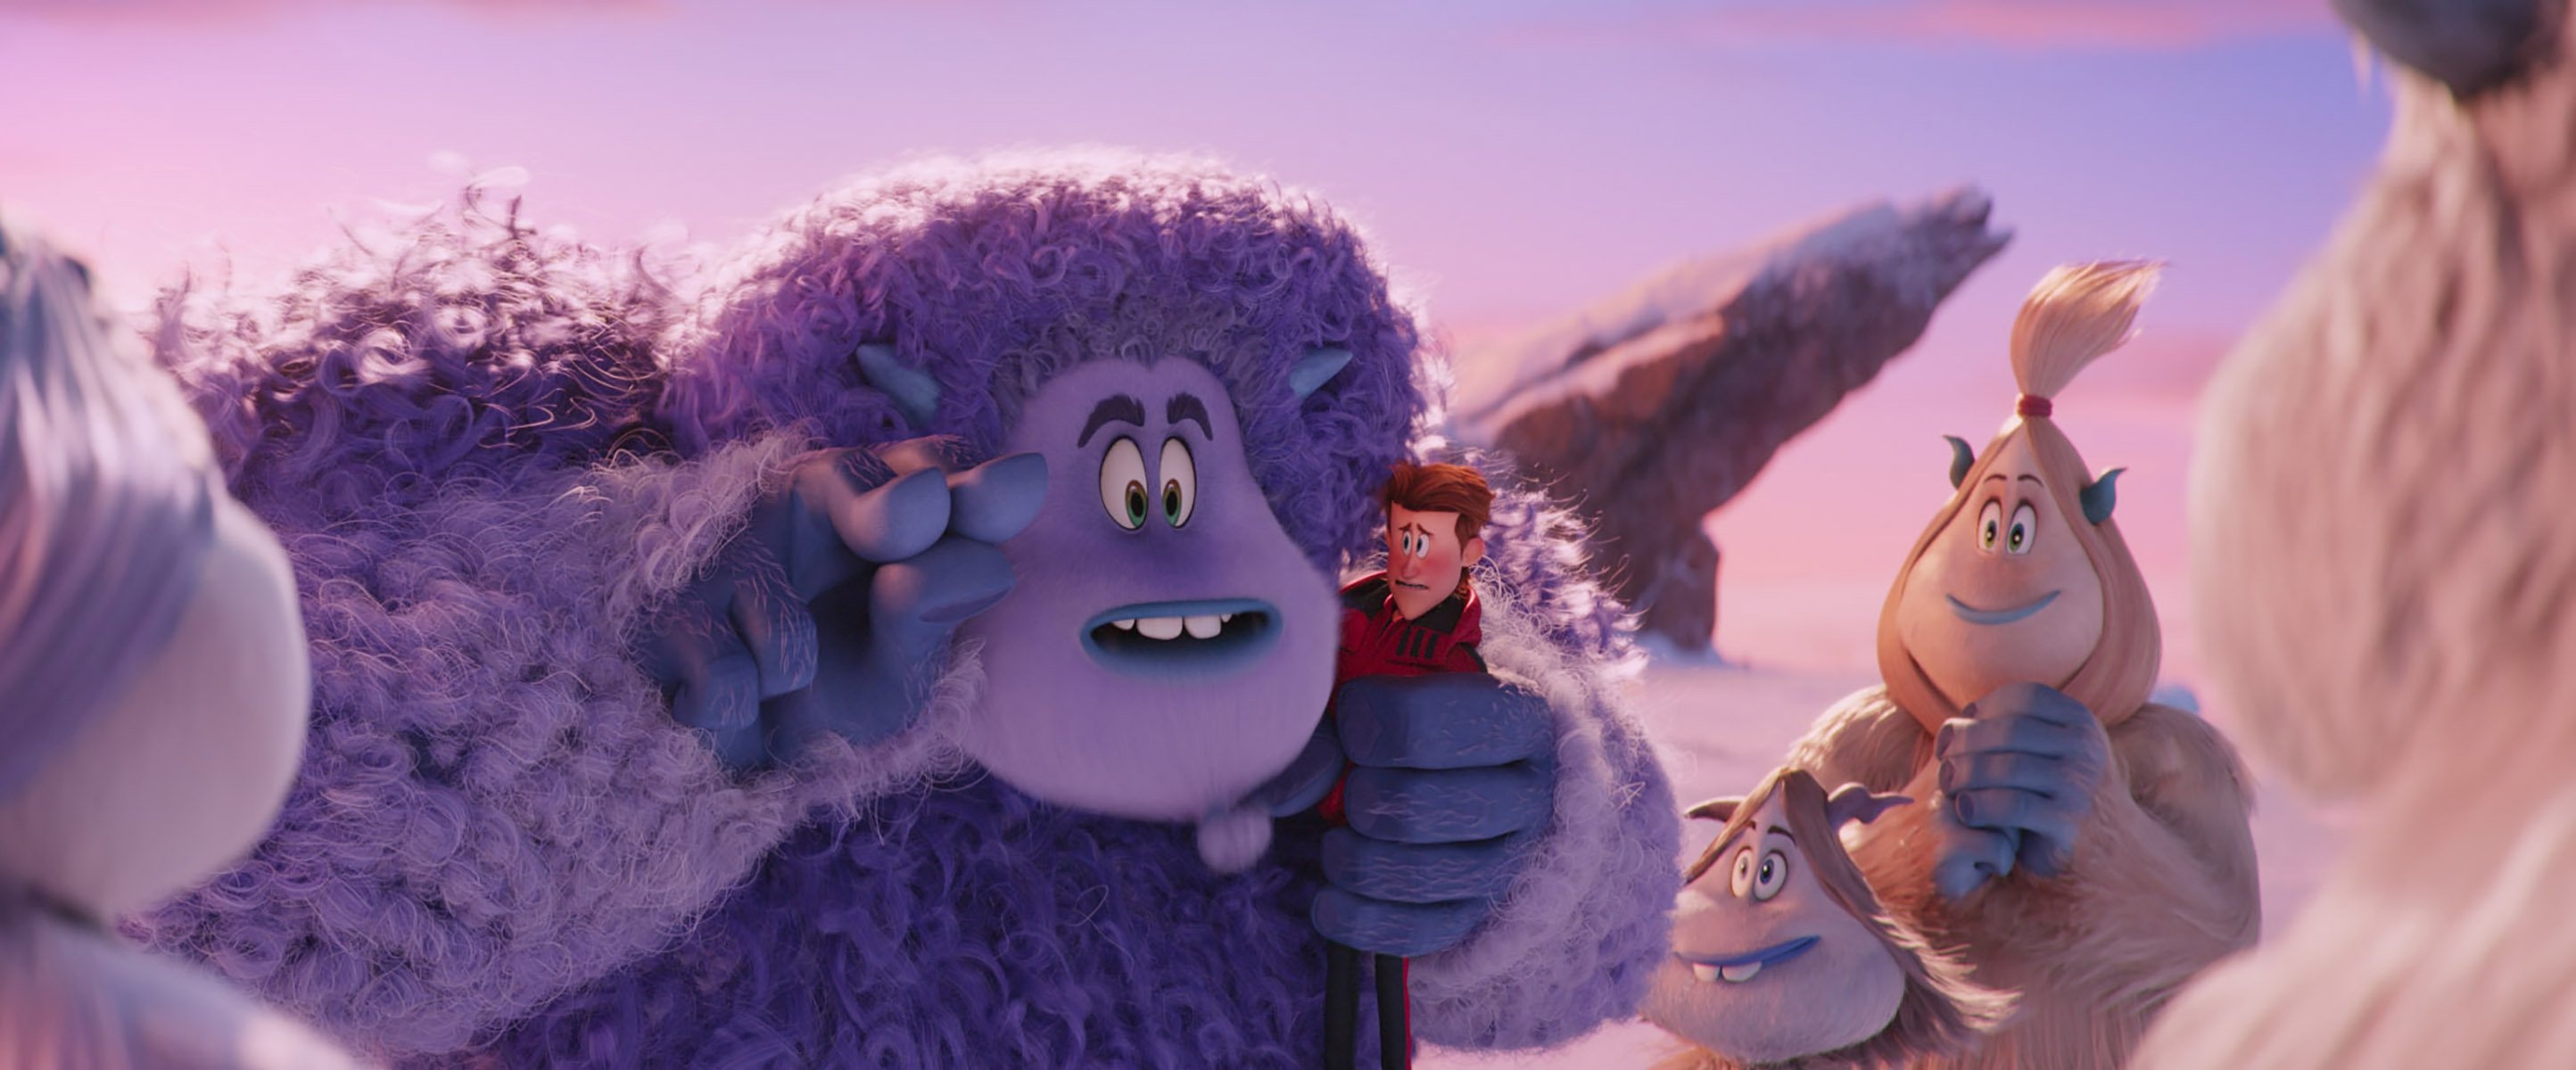 Smallfoot Animation, Movie Review, 2890x1200 Dual Screen Desktop